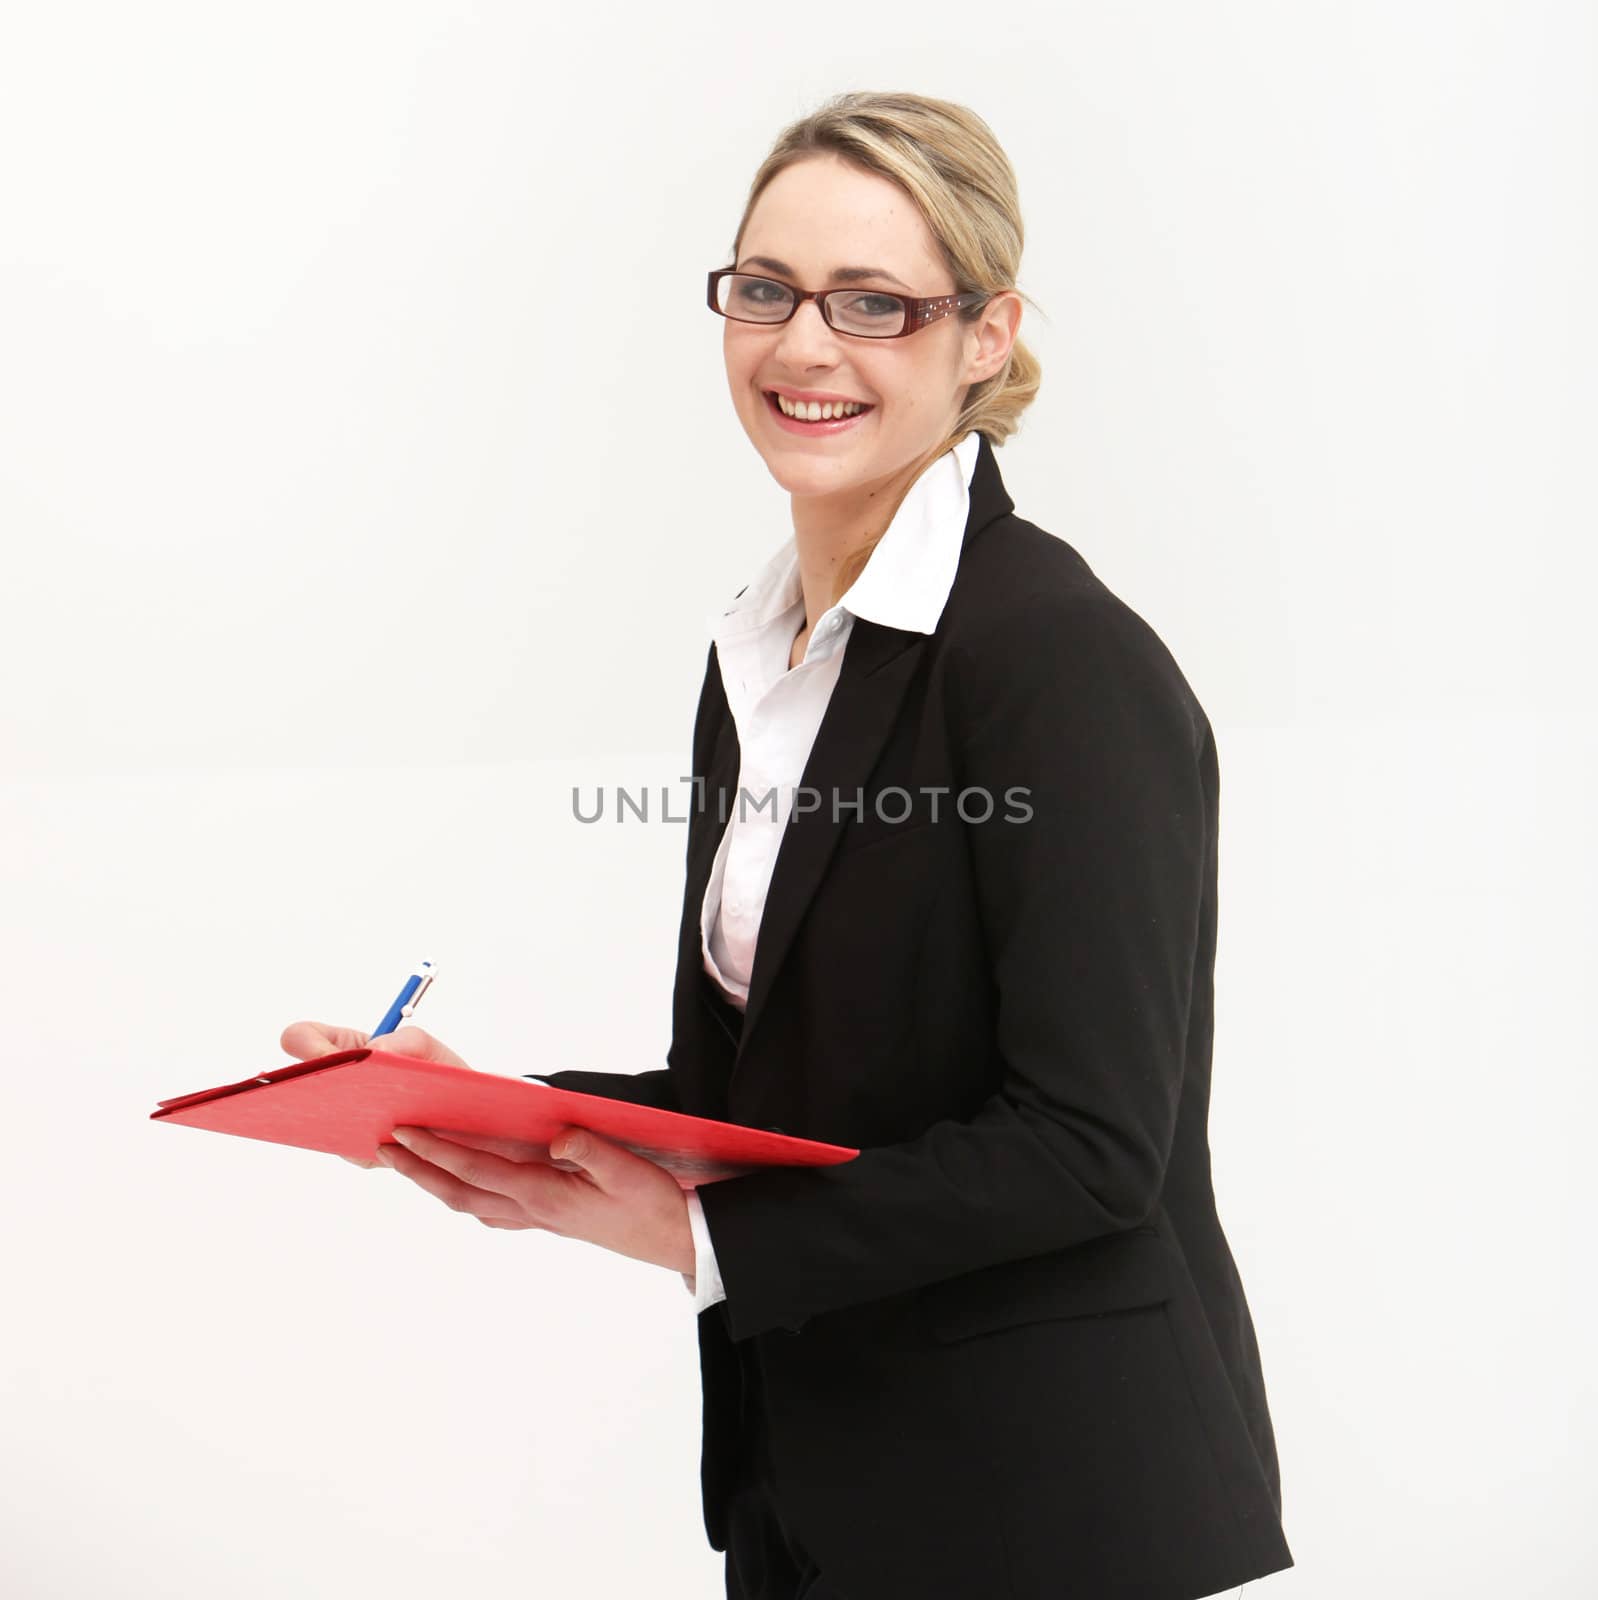 Smiling friendly secretary or assistant wearing glasses writing in a file which she is holding in her hand